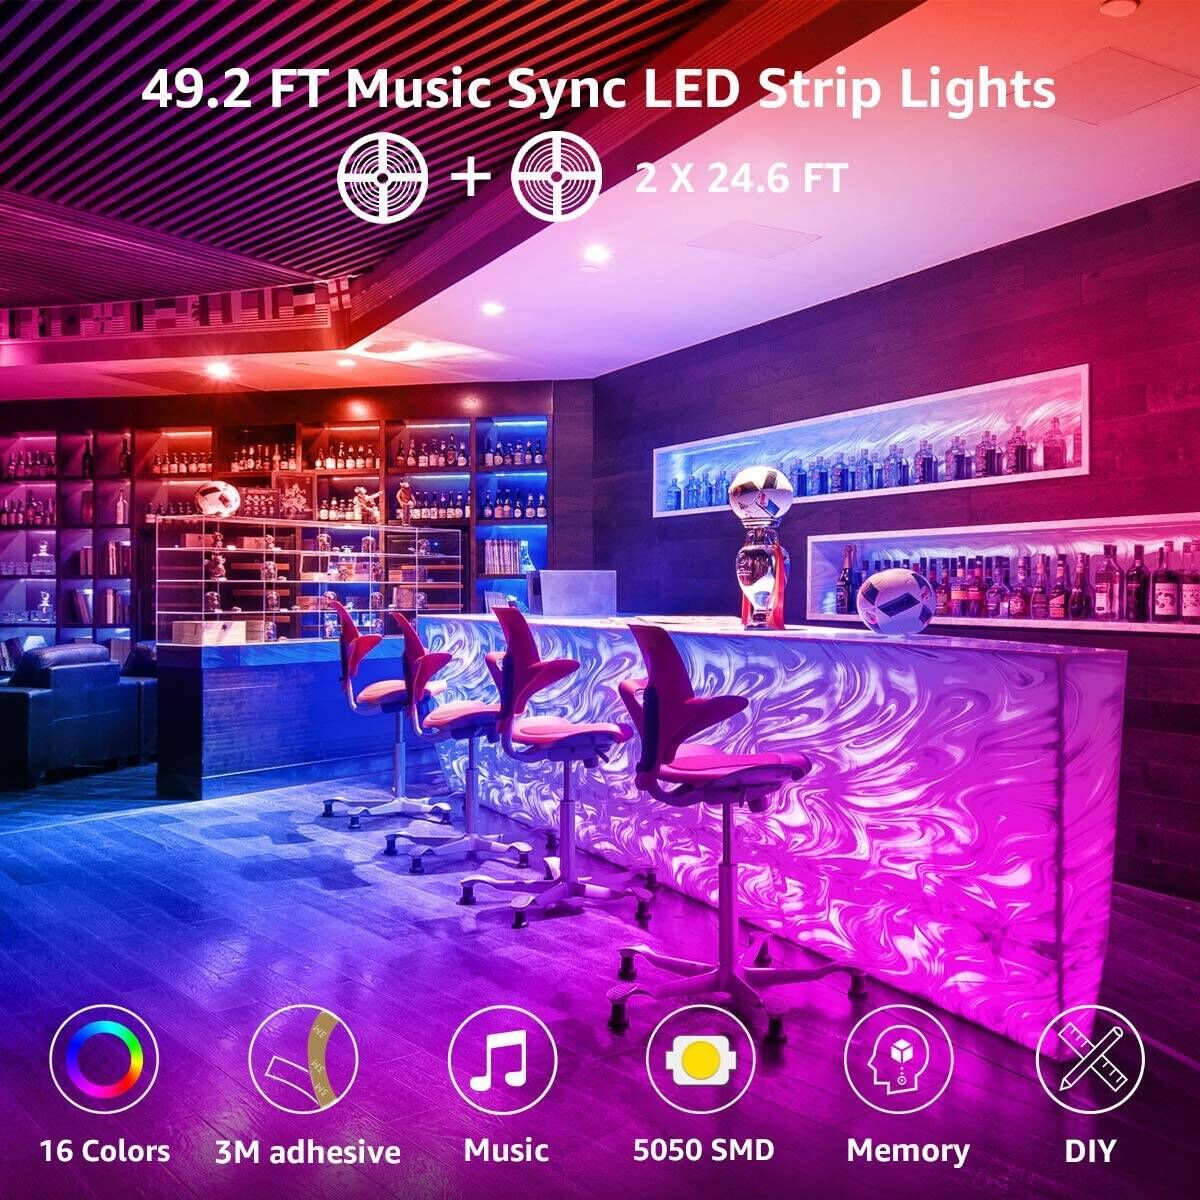 Lepro 49.2ft LED Strip Lights Sync to Music, 5050 SMD RGB Color Changing LED Strips with Remote for Bedroom, Home, TV, Parties and Festivals